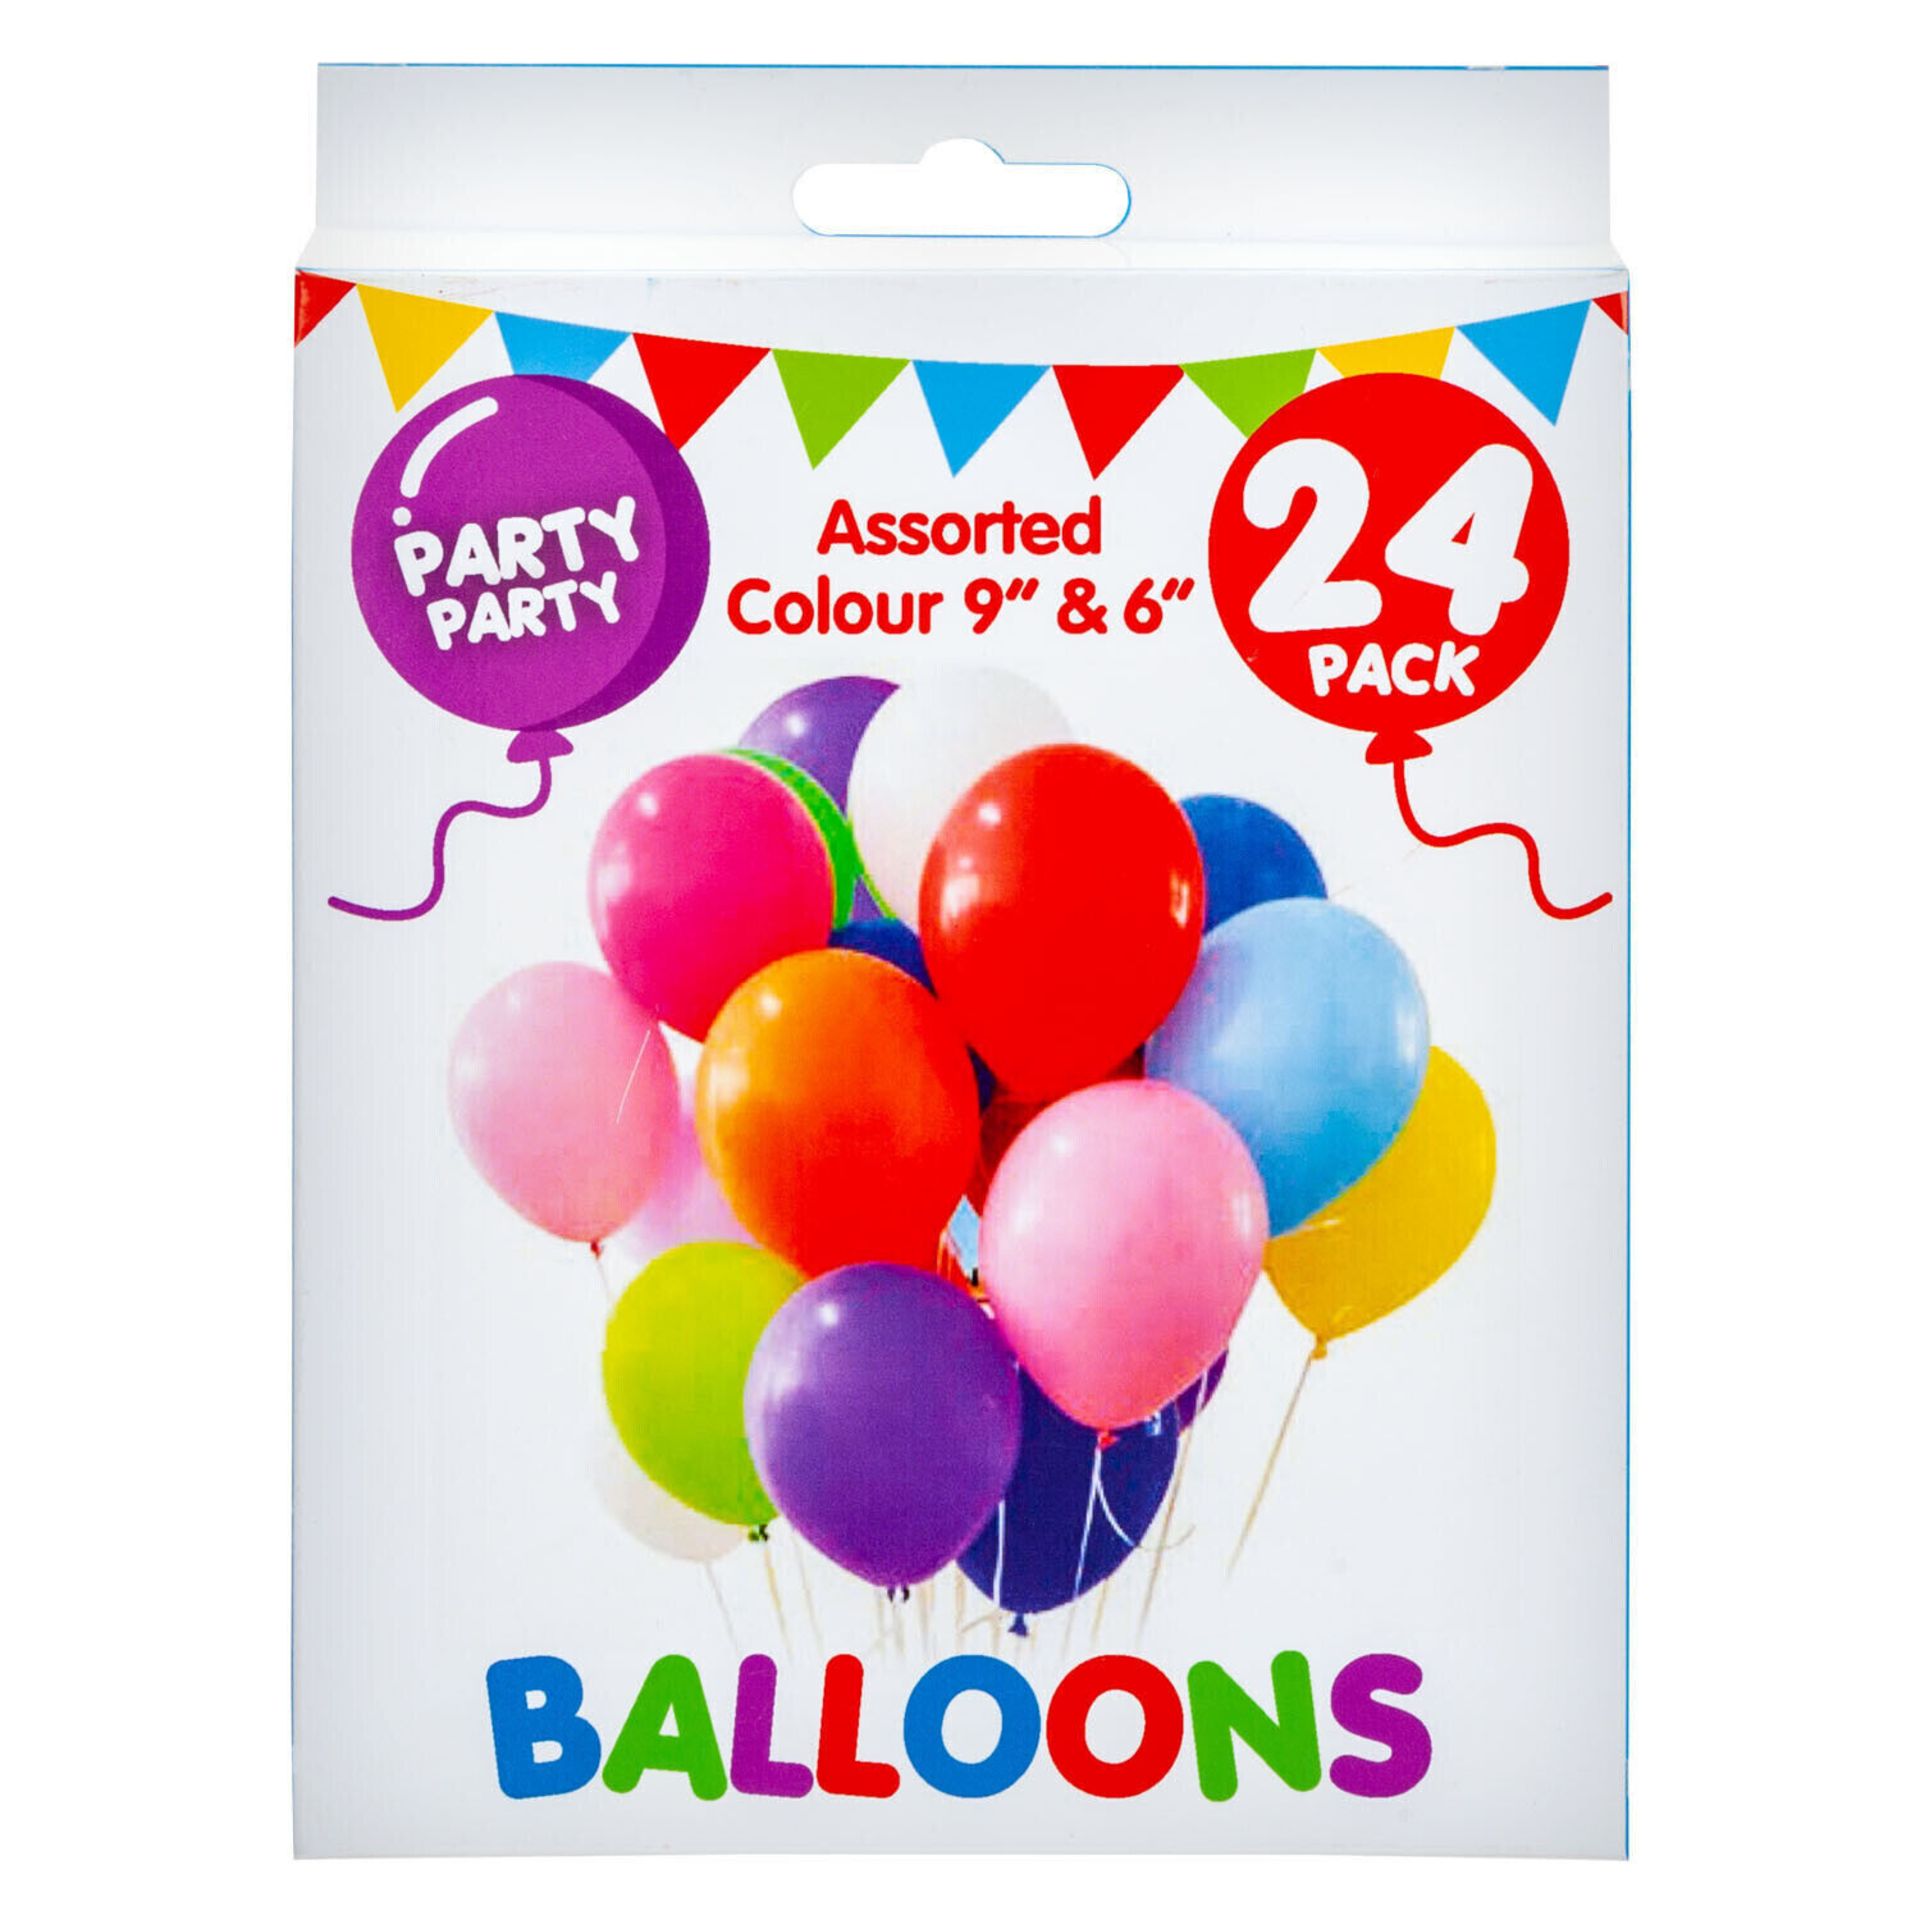 1000 X NEW 9"&6" - 24 PACK ASSORTED COLOURED BALLOONS